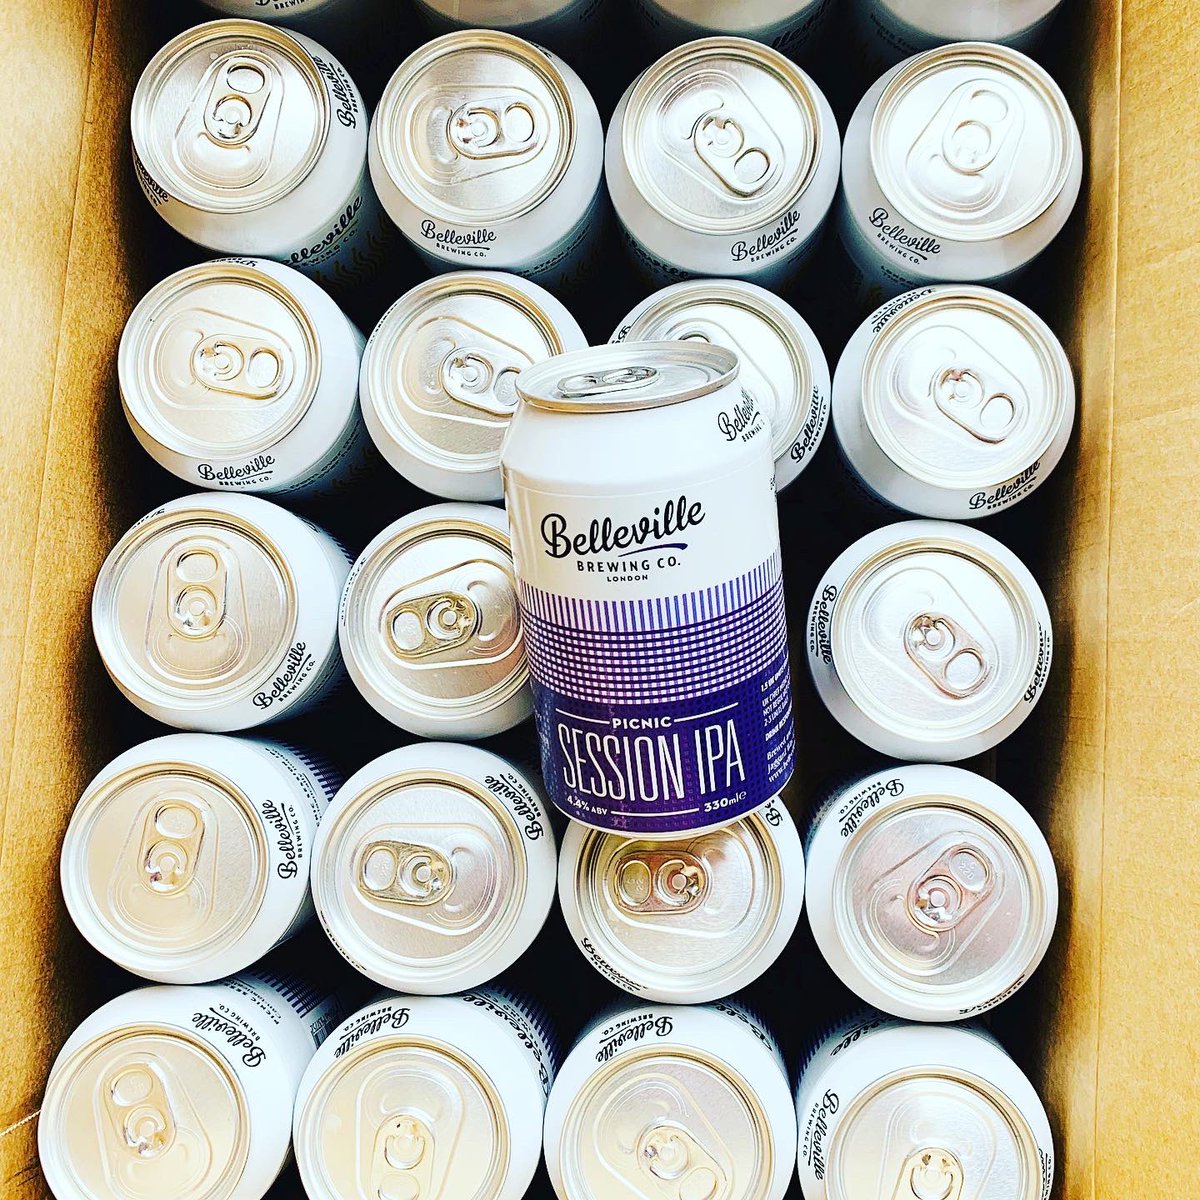 FRIDAY BEERS ANYONE?   Ordering from us is pretty simple! Email info@bellevillebrewing.co.uk with 1) Your order 2) Your name 3) Your address 4) Your phone number  We will process your order, and deliver your delicious beers to your doorstep, safely and quickly! (1/3)